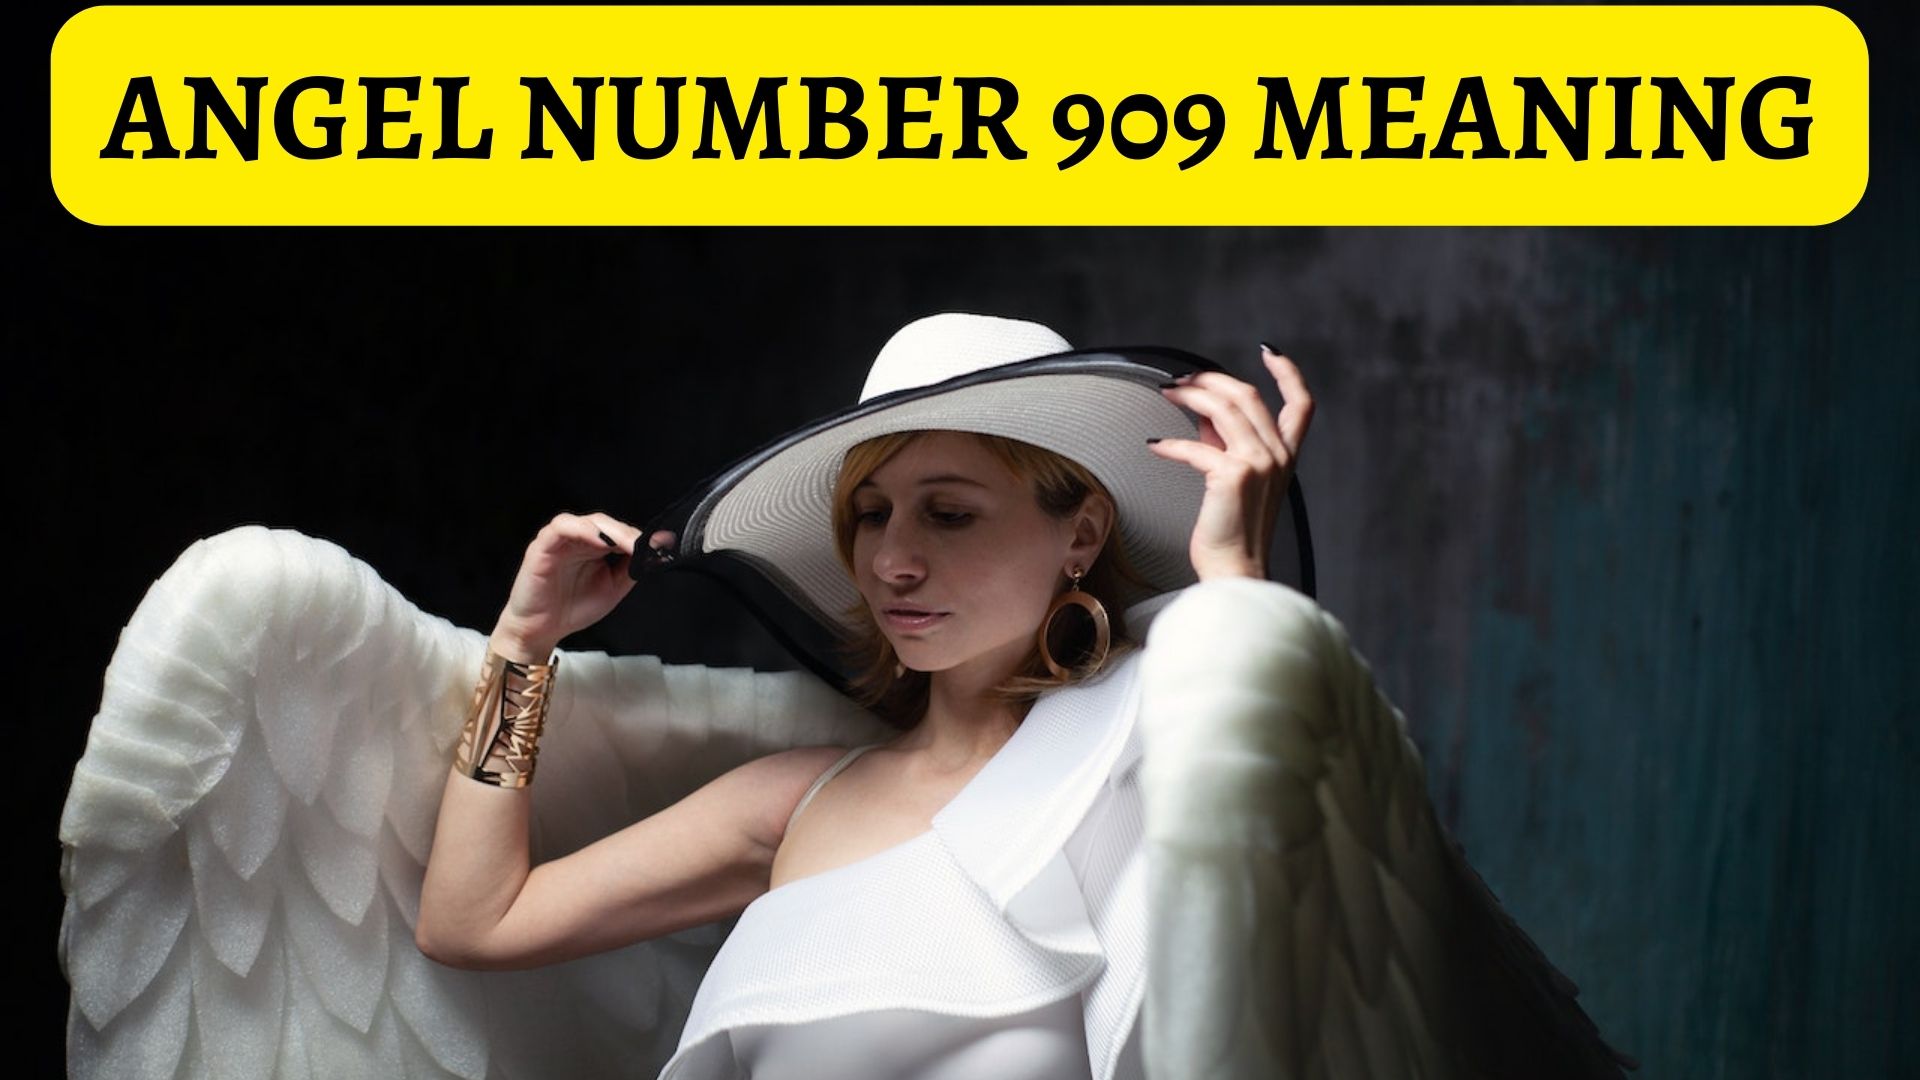 Angel Number 909 Meaning - Symbolism & Spiritual Significance